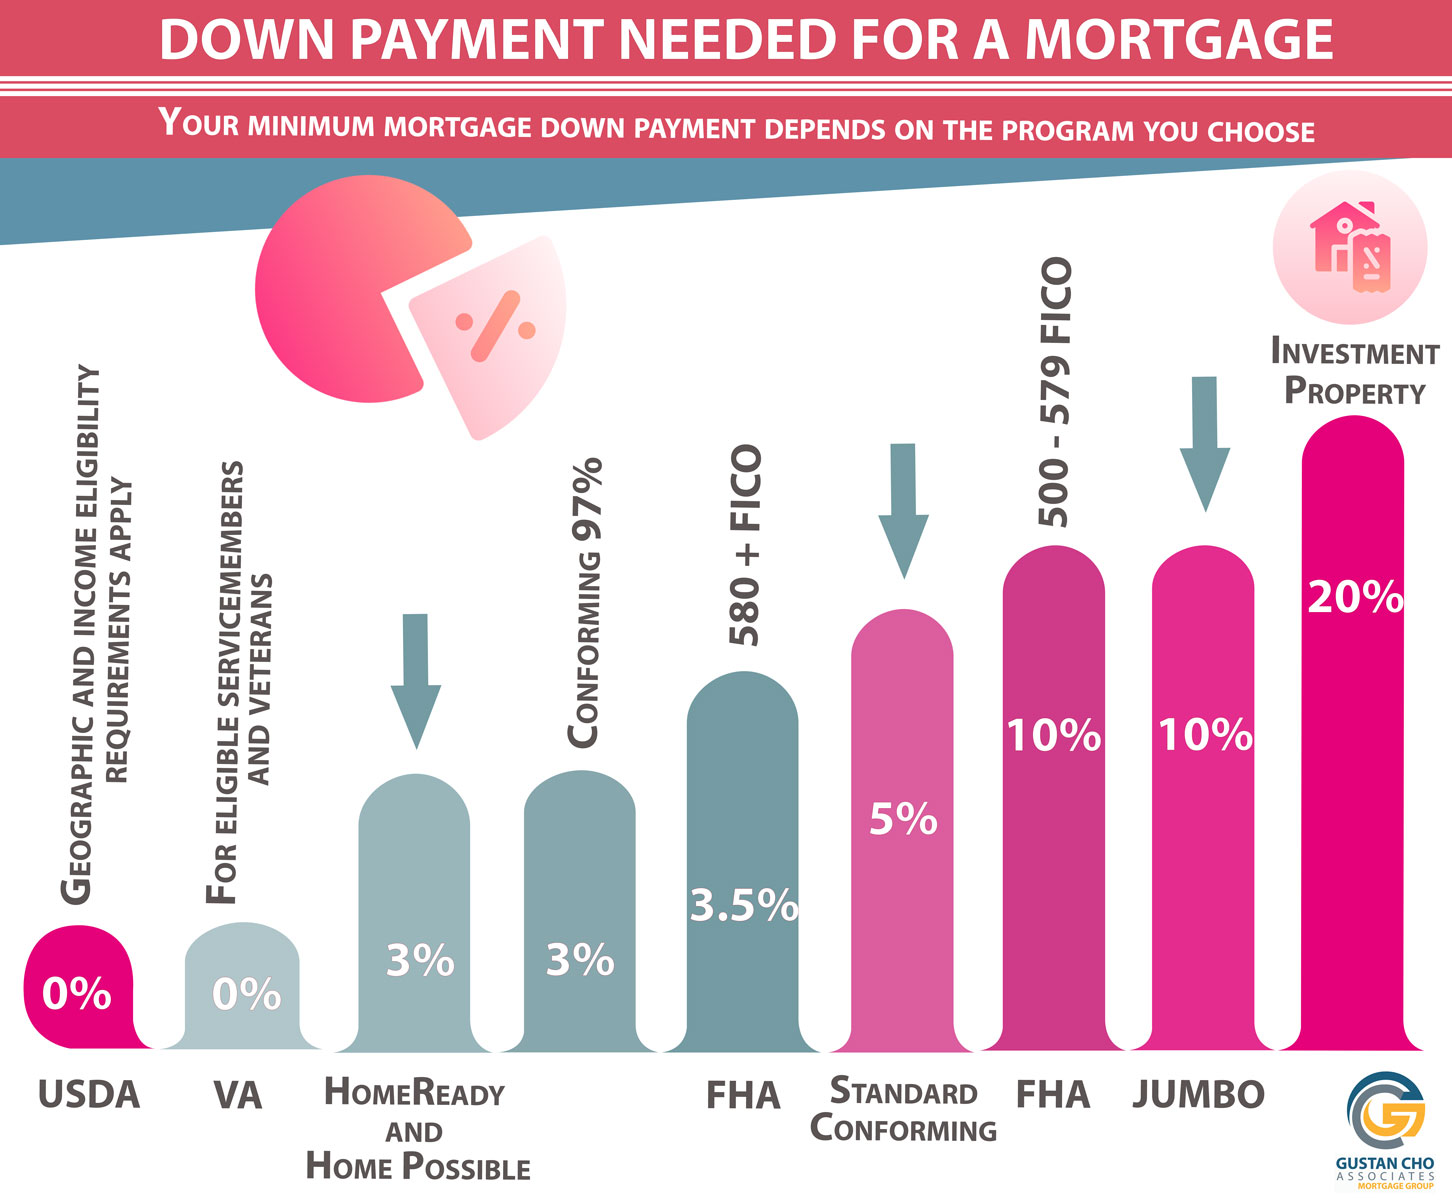 How much Down Payment Do I Need To Purchase A Home